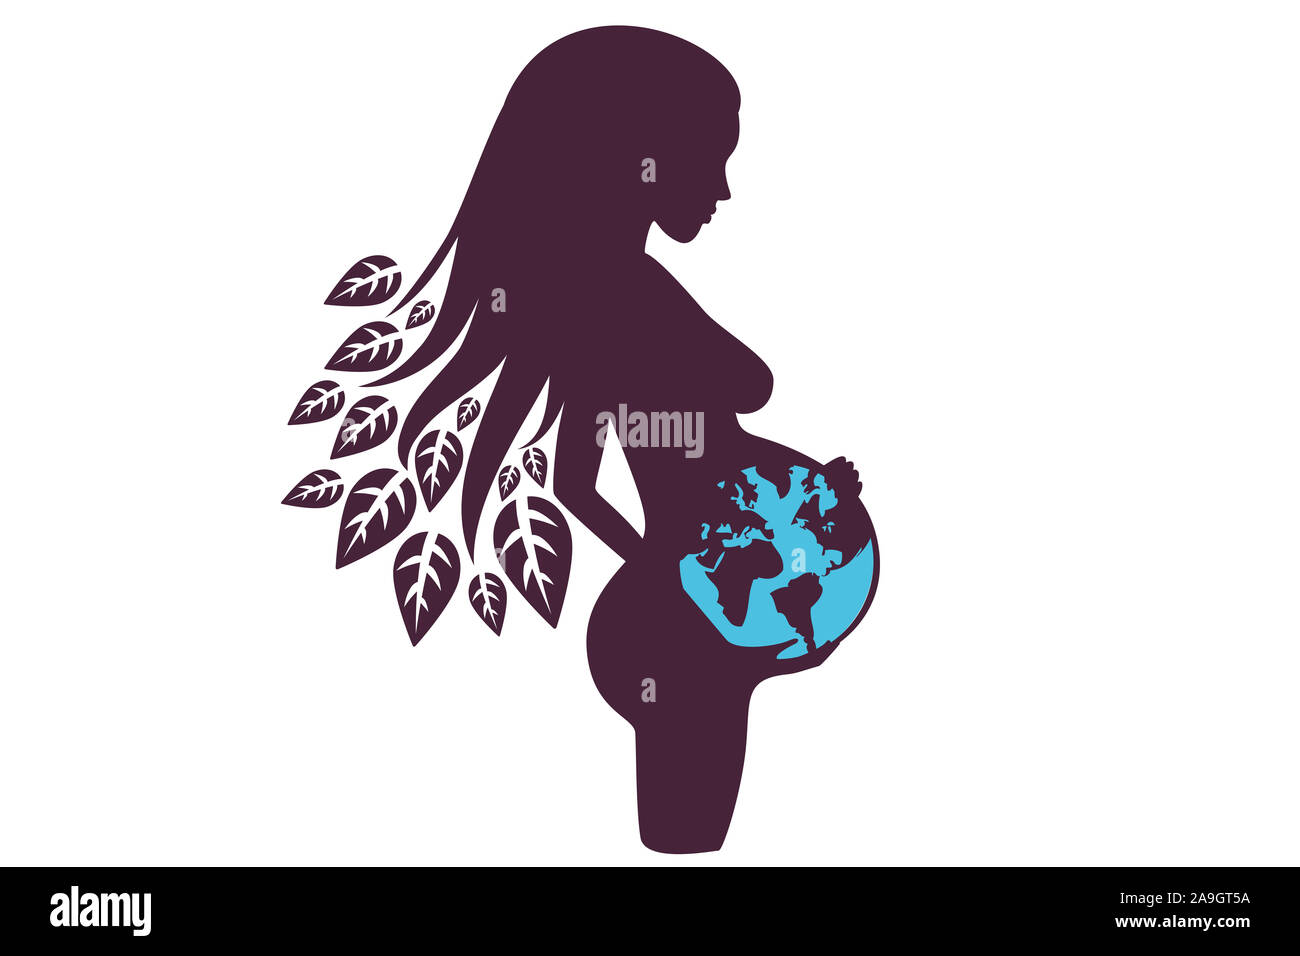 Illustration of a yougn pregnant woman with earth and nature Stock Photo